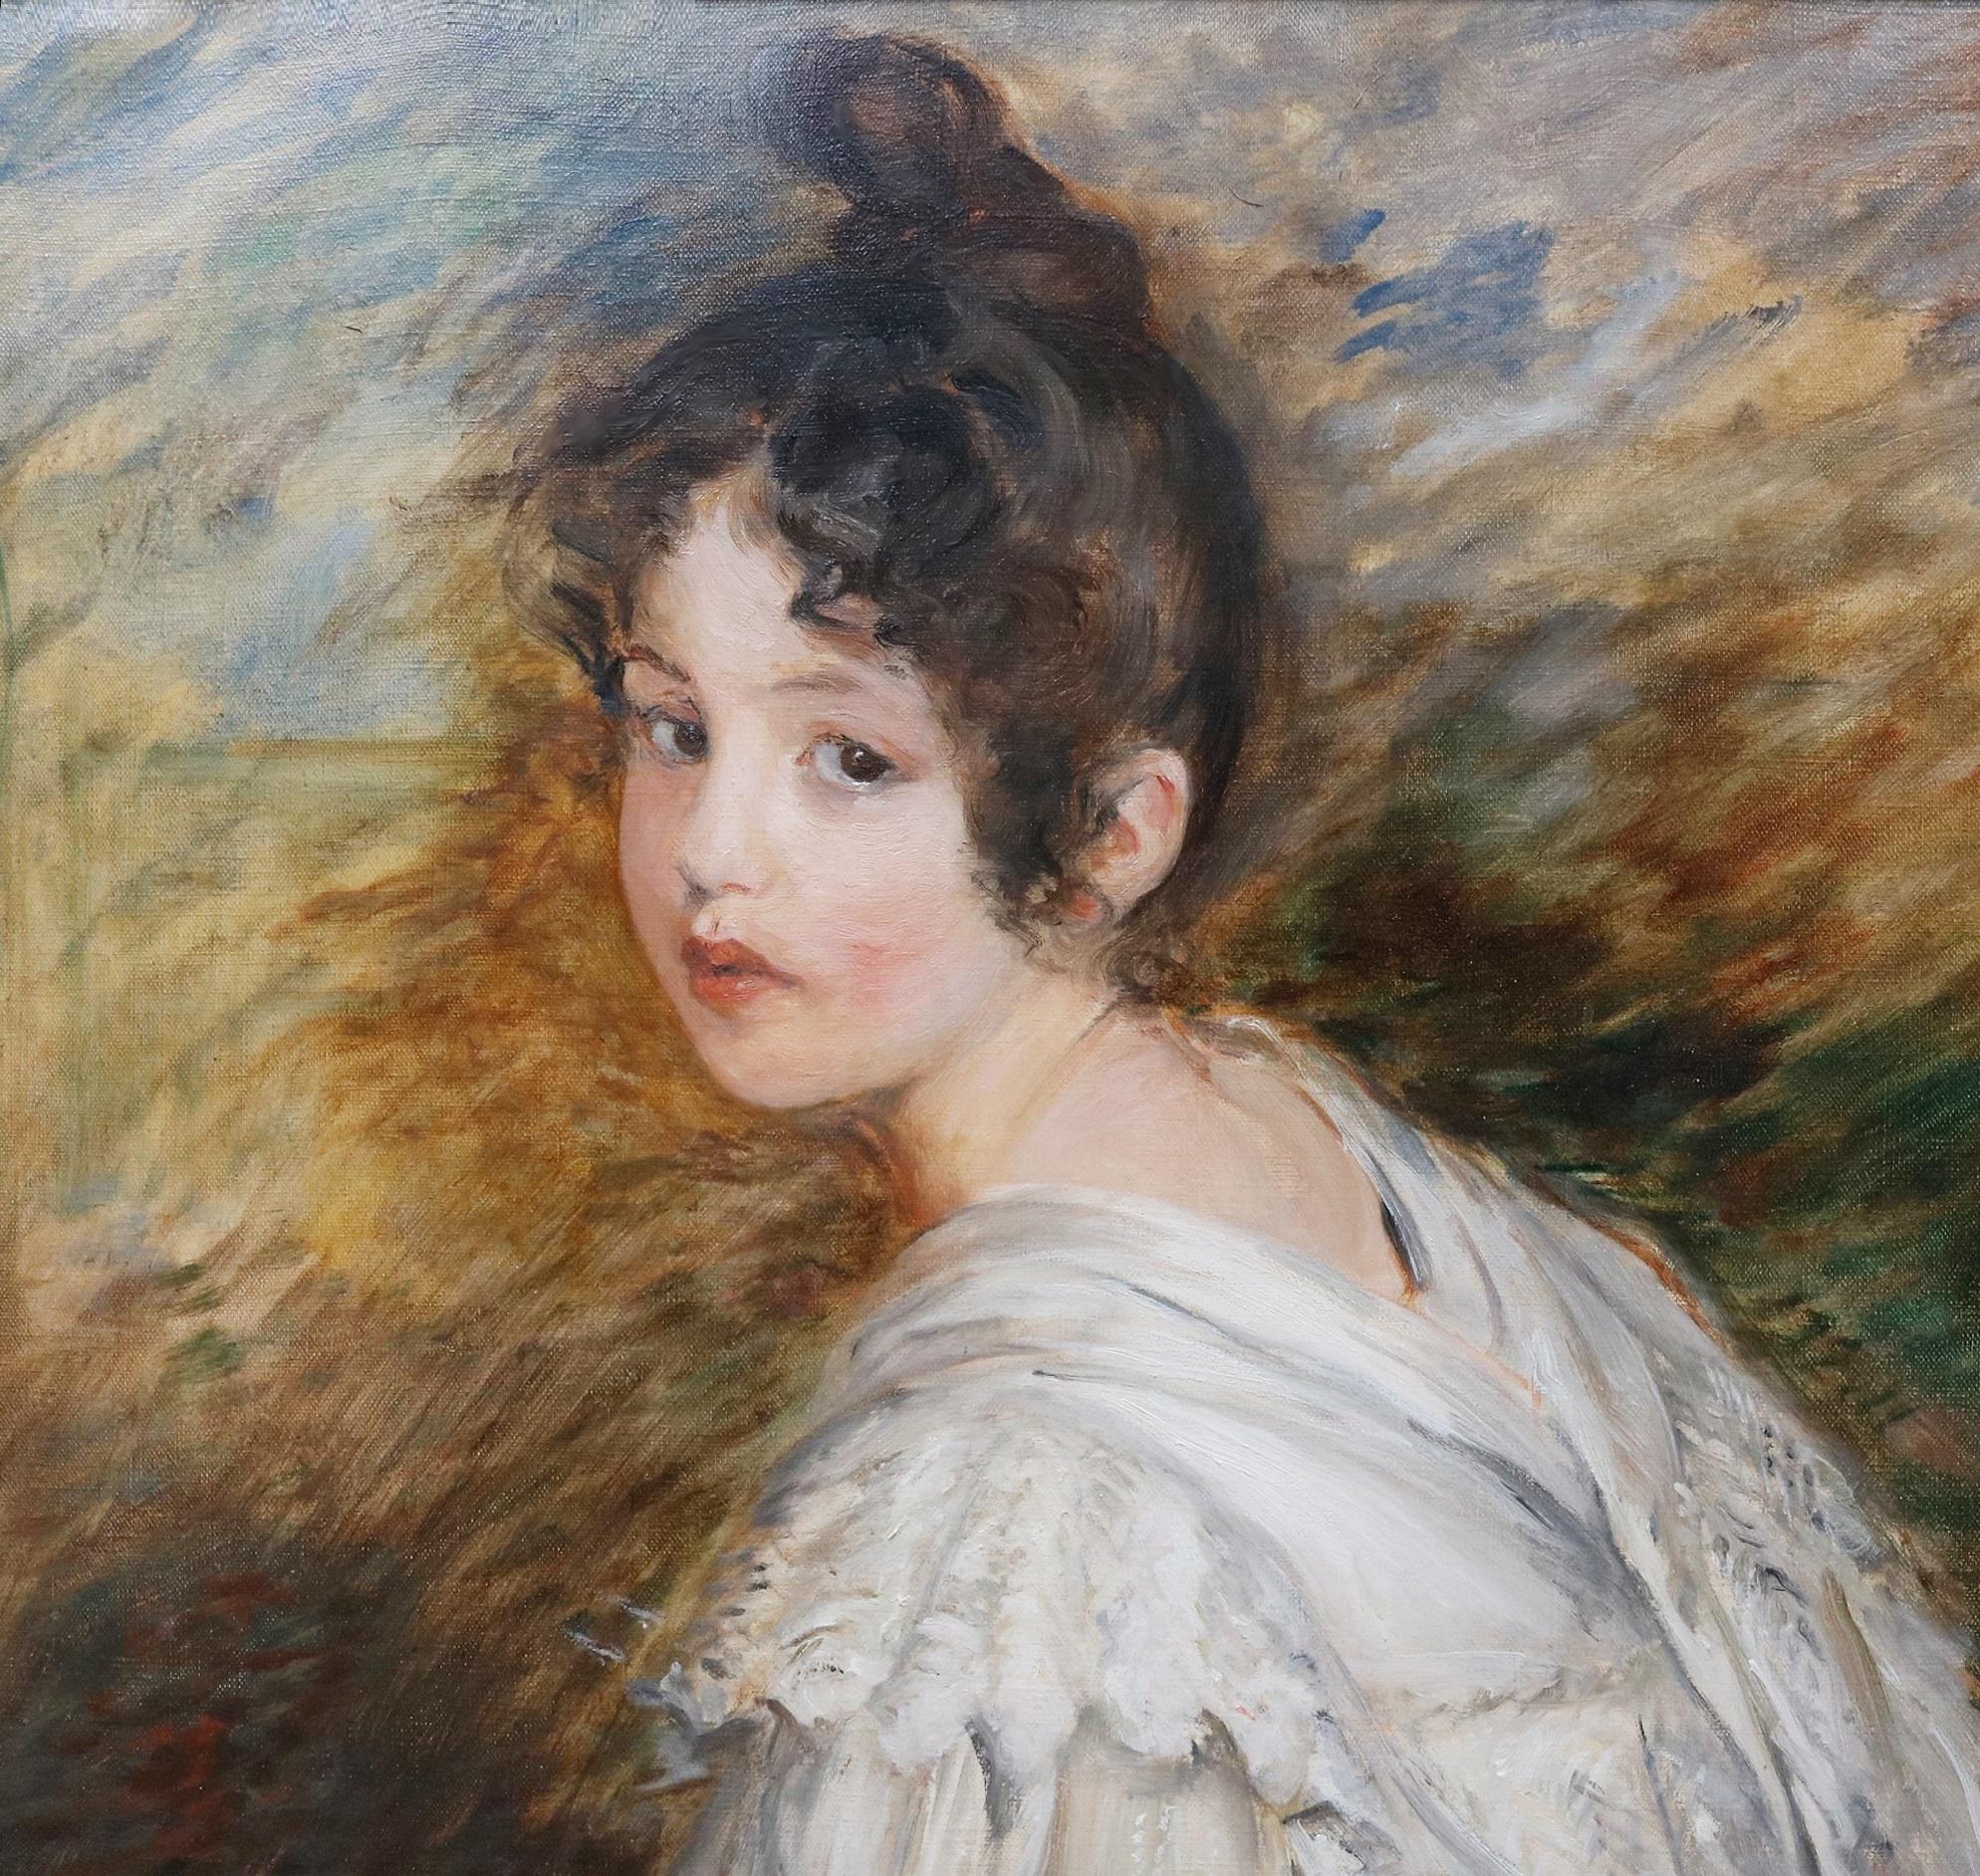 ‘Jeune Fille en Blanc’ by Jacques-Émile Blanche (1861-1942). 

The painting – which depicts one of the artist’s favourite models Wanda Zielinska – is signed and dated 1896. It is listed and illustrated in the Catalogue Raisonné of the complete works